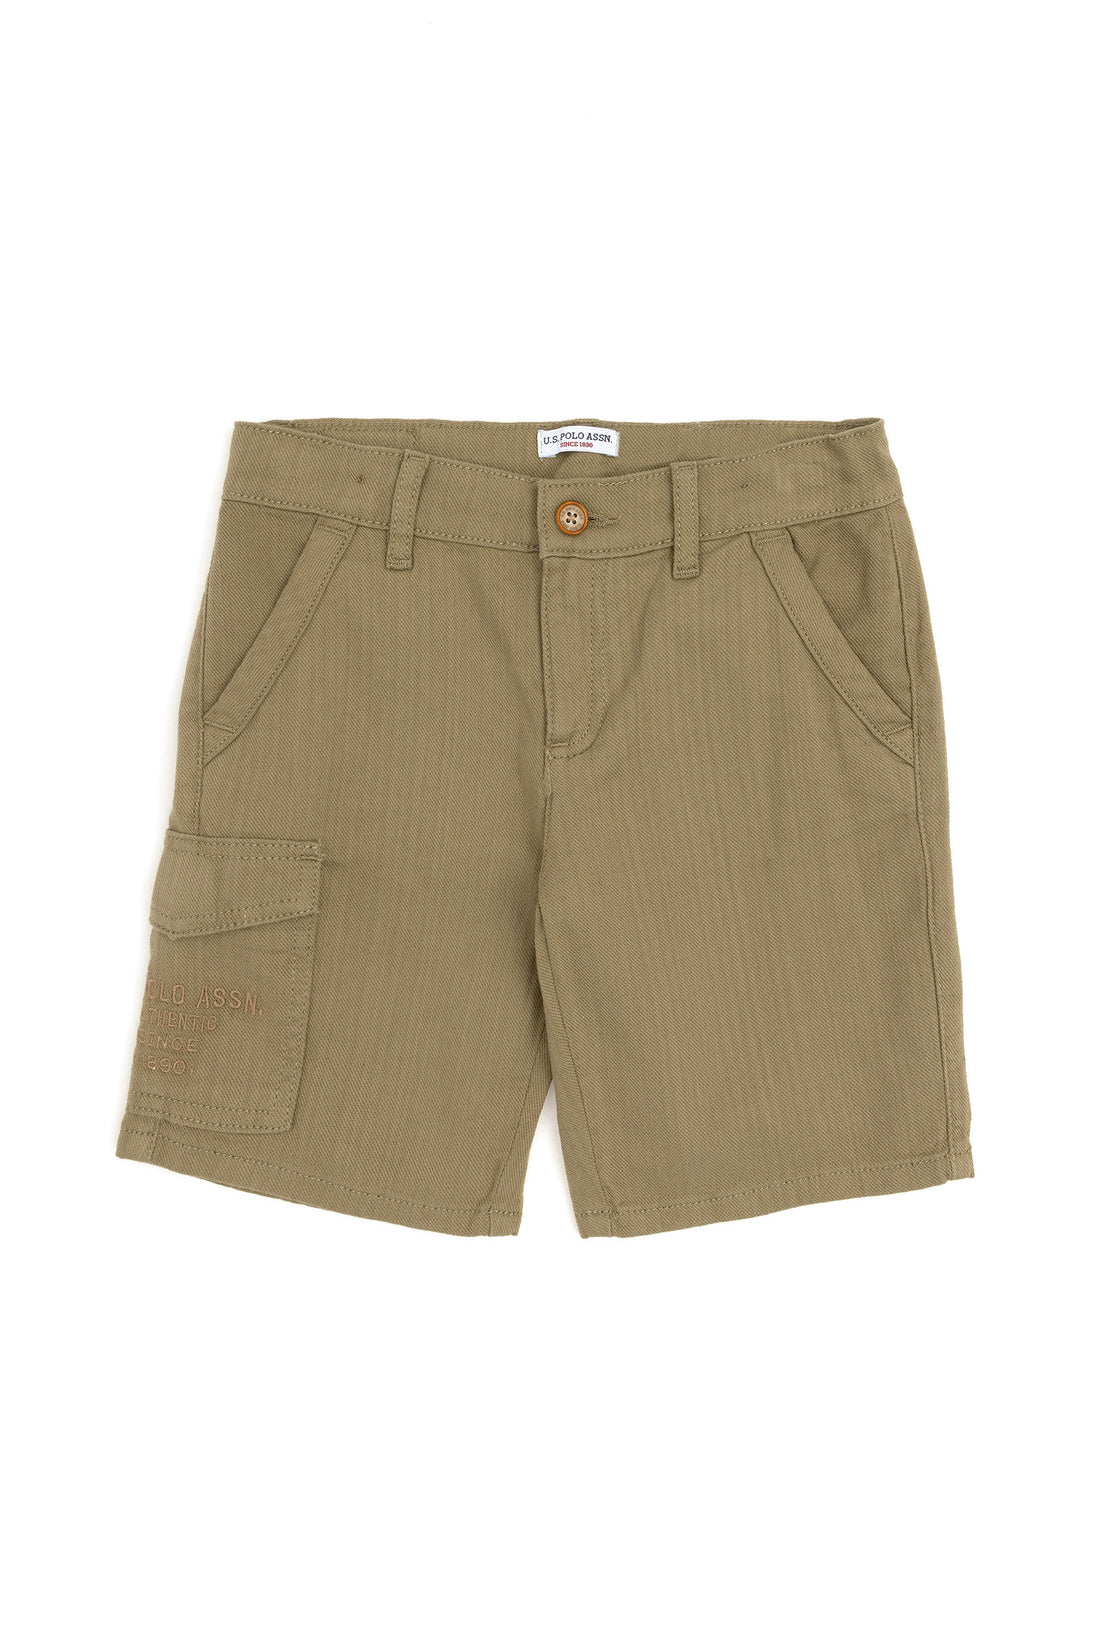 Chino Shorts With Side Pocket_G083SZ0310 1833428_VR111_02